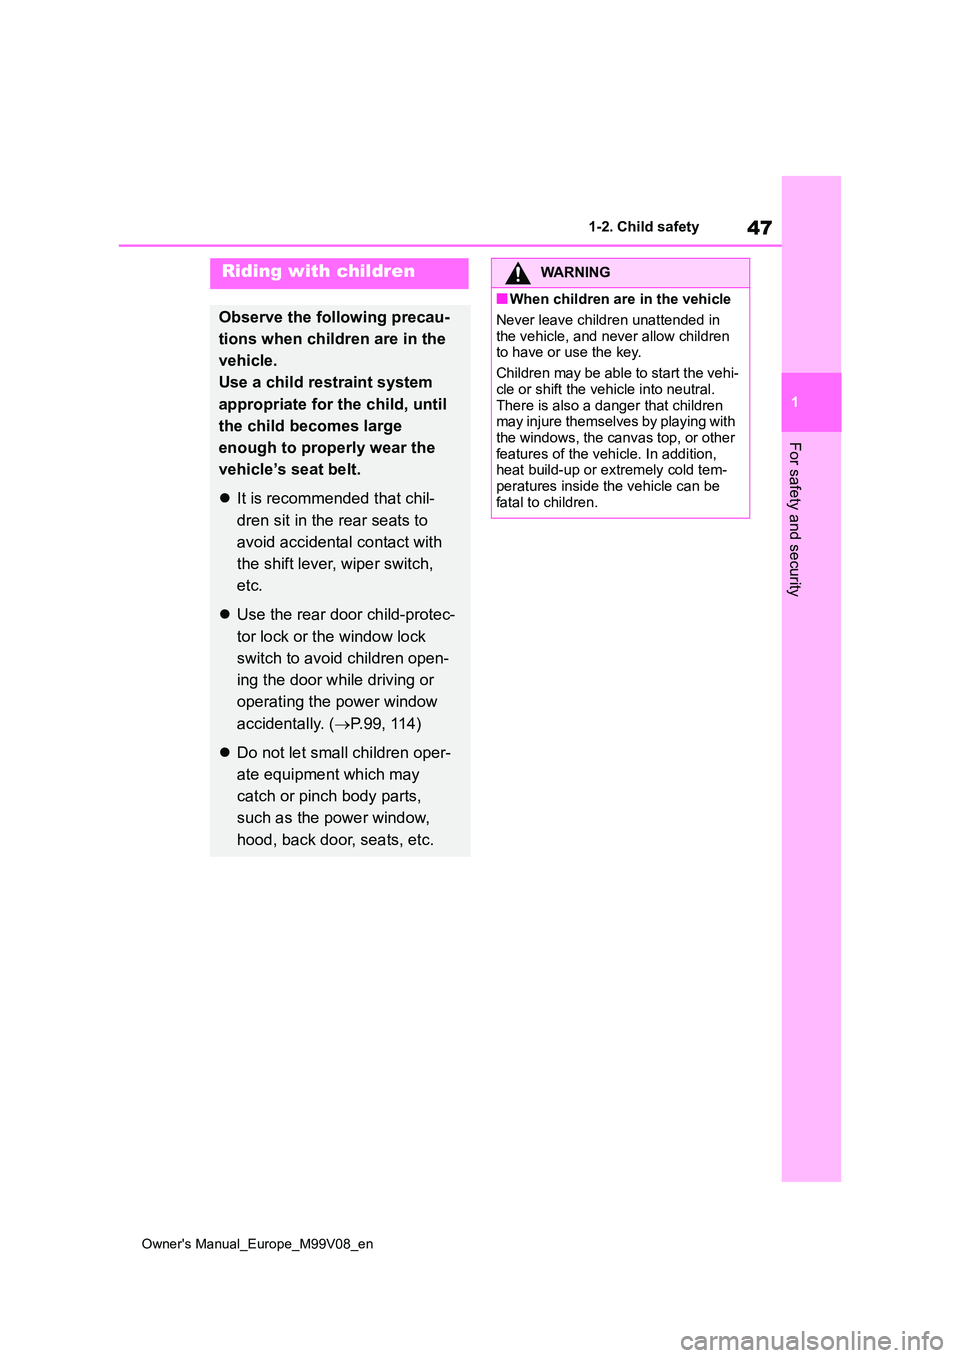 TOYOTA AYGO X 2022   (in English) User Guide 47
1
Owner's Manual_Europe_M99V08_en
1-2. Child safety
For safety and security
Riding with children
Observe the following precau- 
tions when children are in the  
vehicle. 
Use a child restraint 